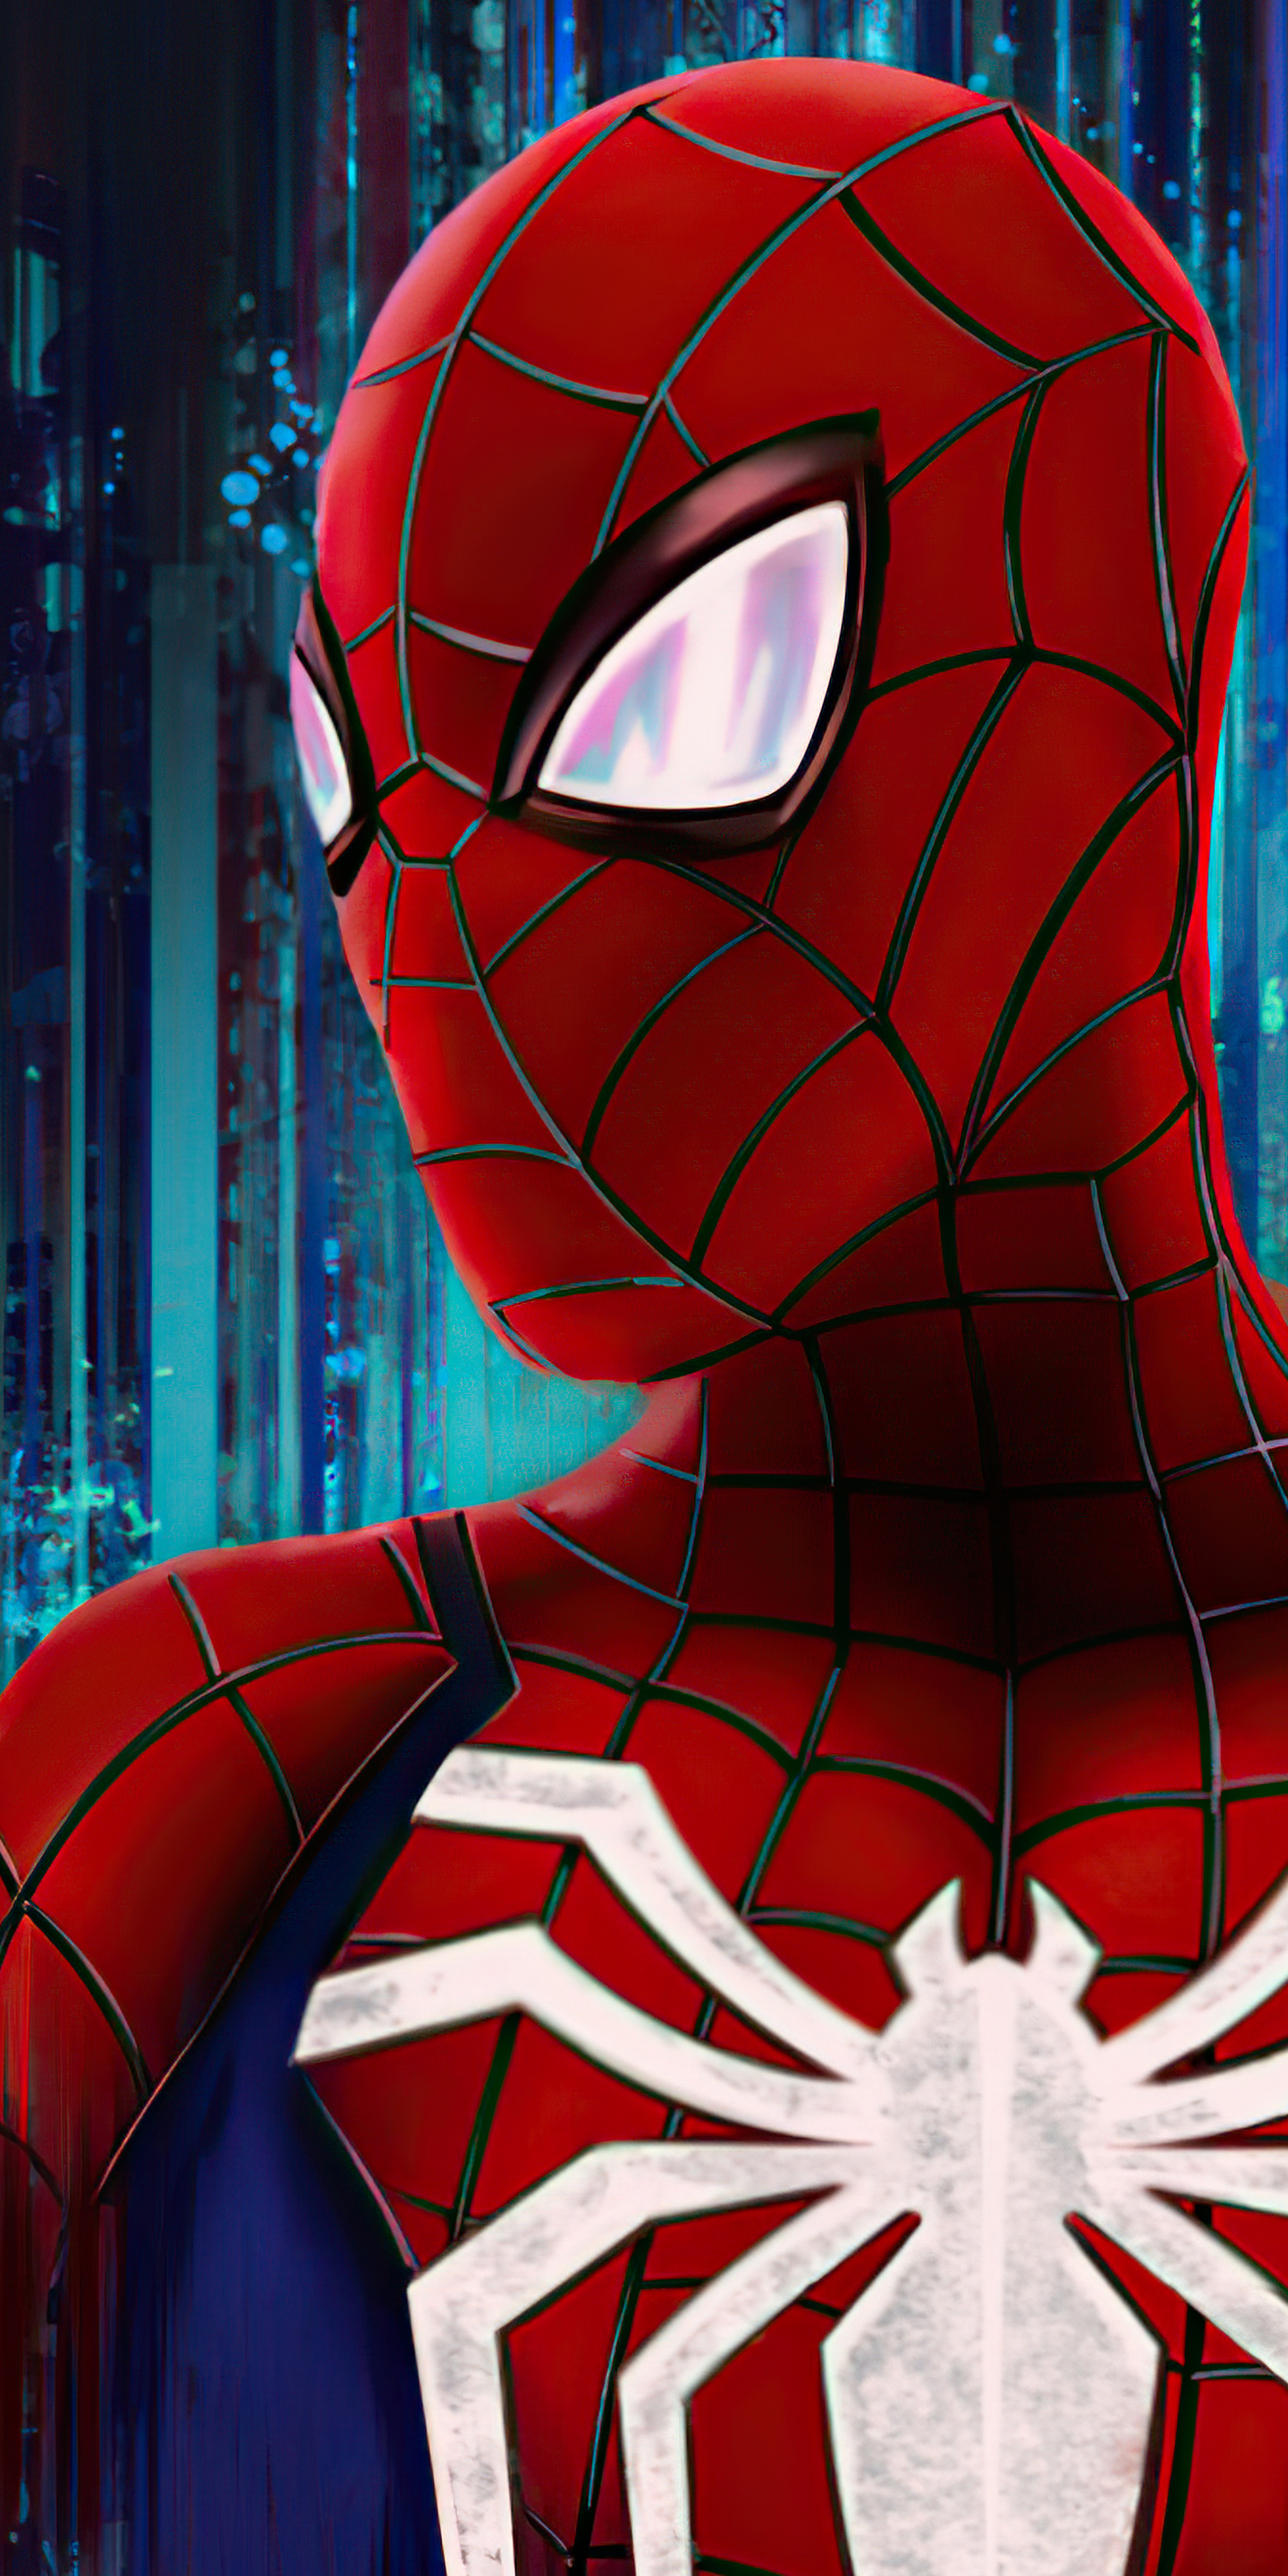 Spider-Man Phone Wallpaper by Taylor E. Mathias - Mobile Abyss